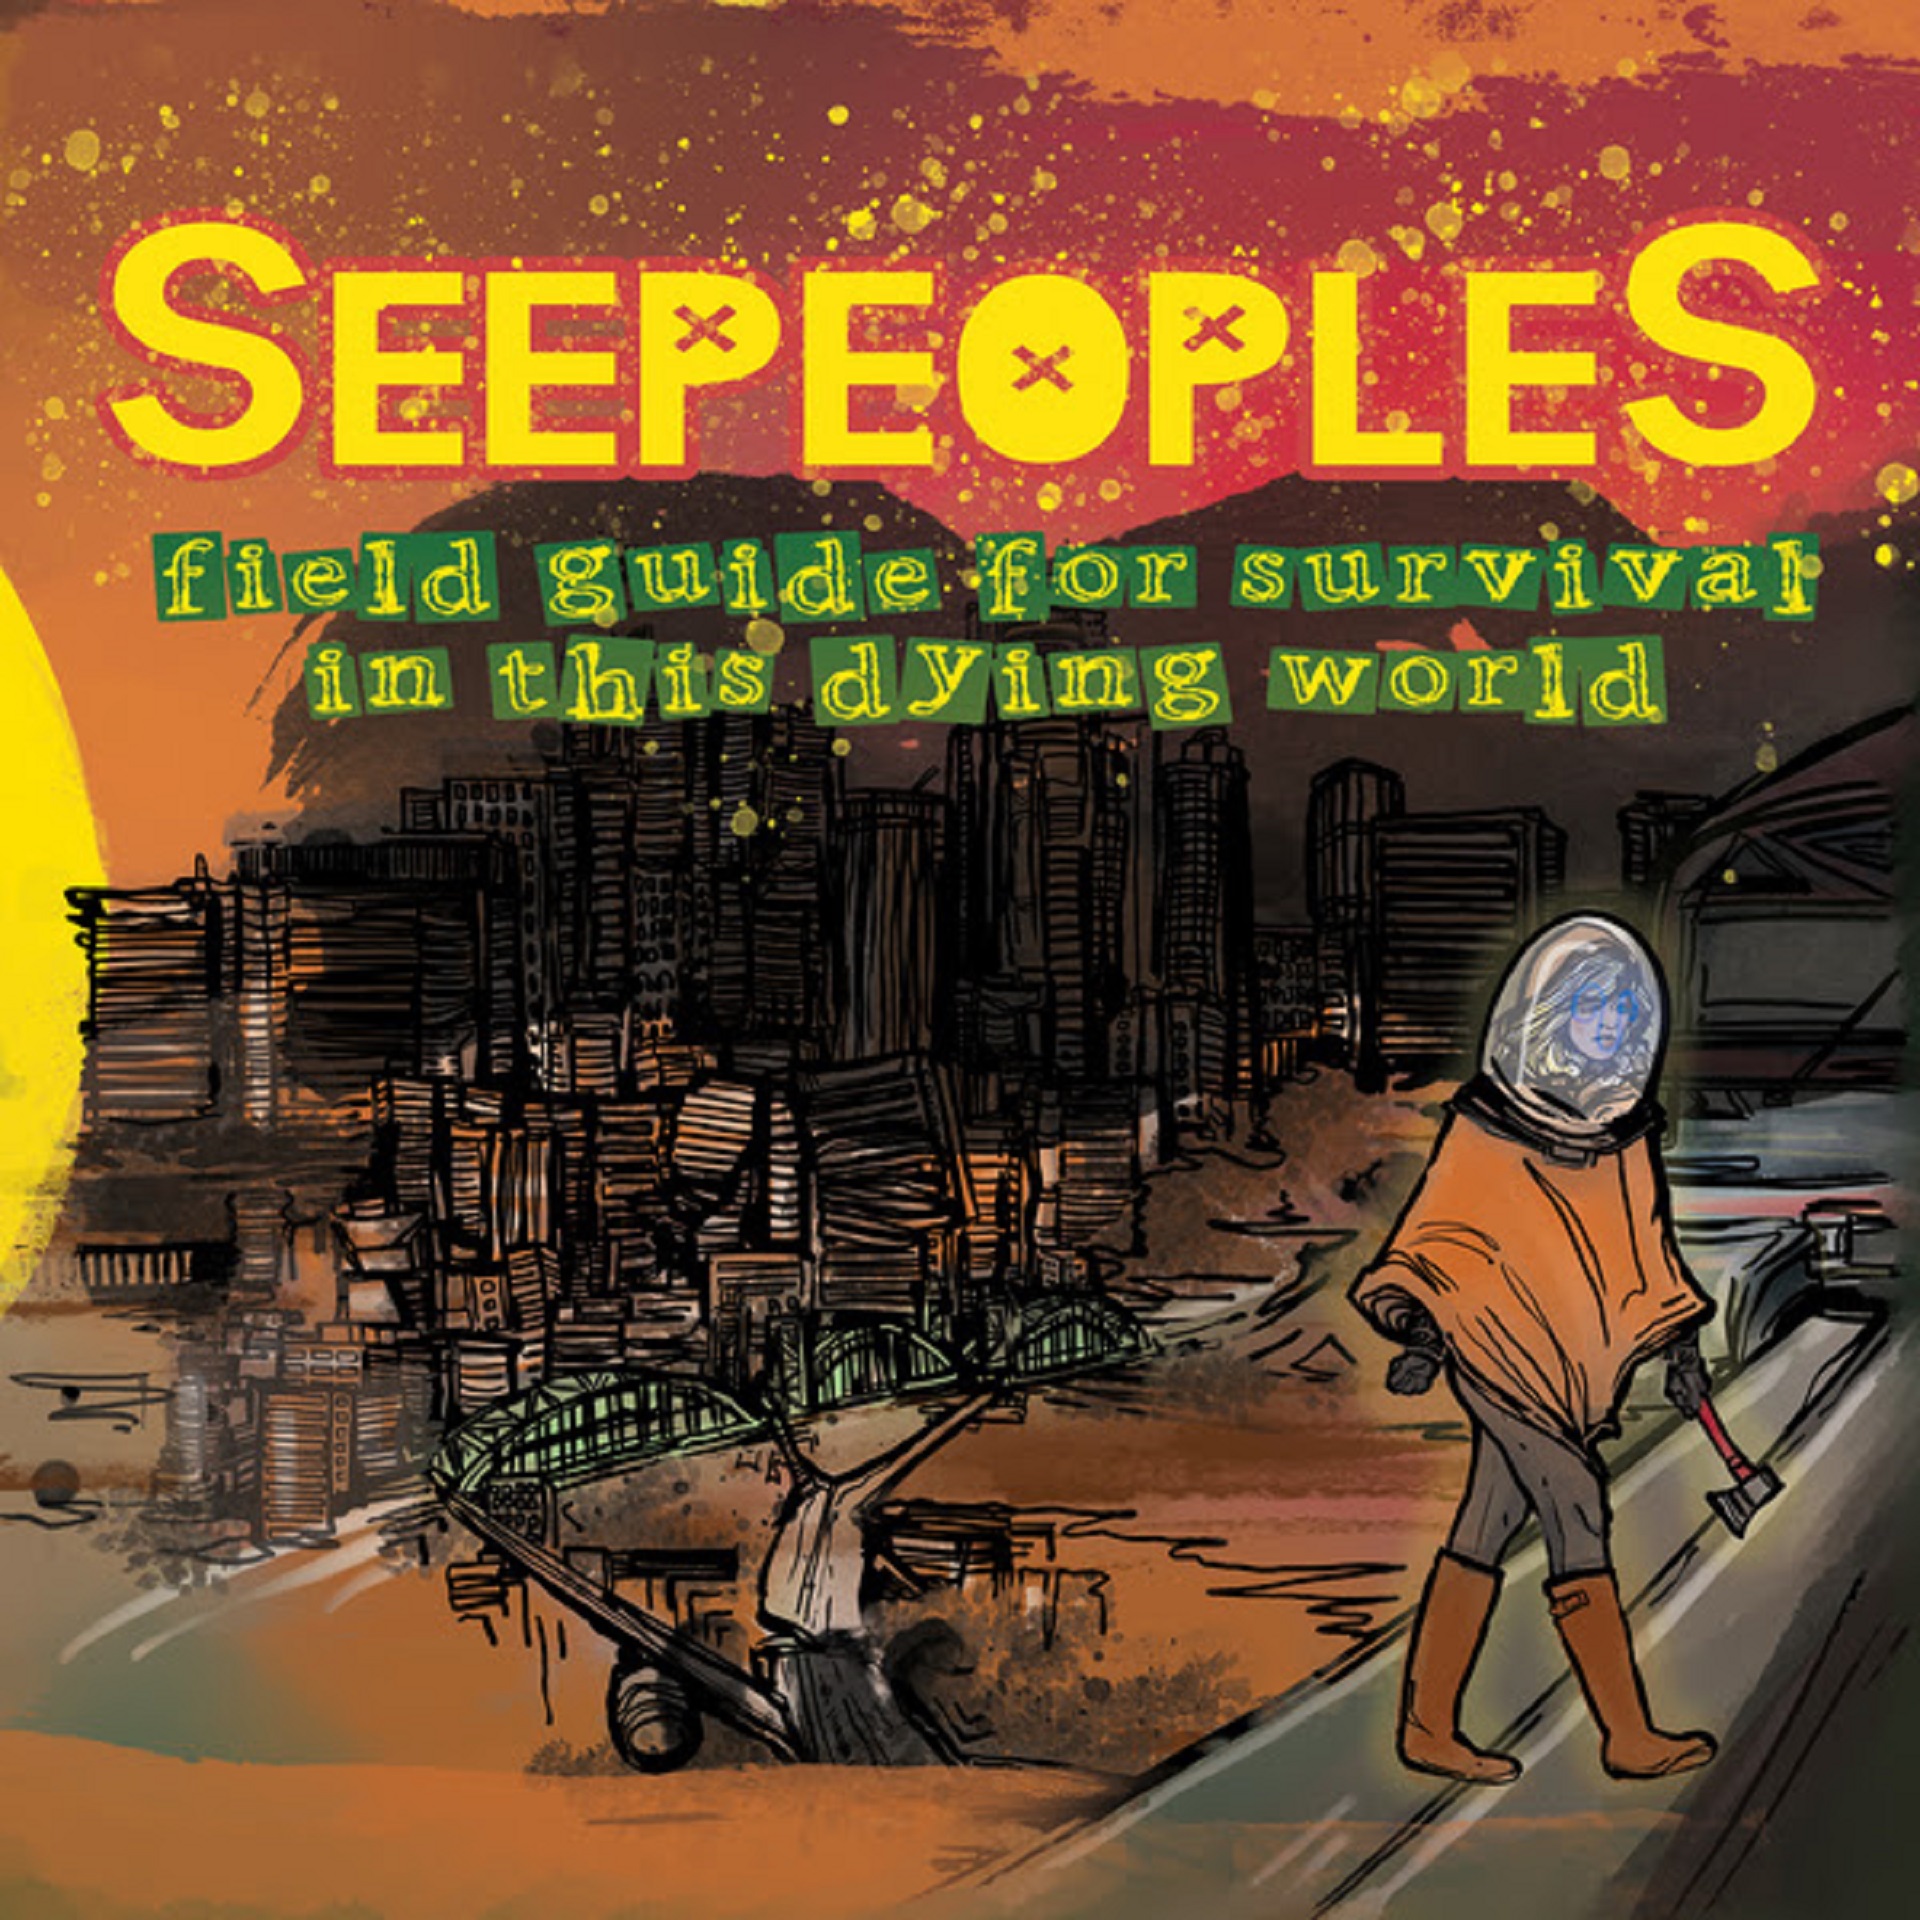 SeepeopleS drop new single ft. Tim Reynolds (Dave Matthews Band) + mbrs of Ghost Of Paul Revere, The Nth Power, John Brown's Body